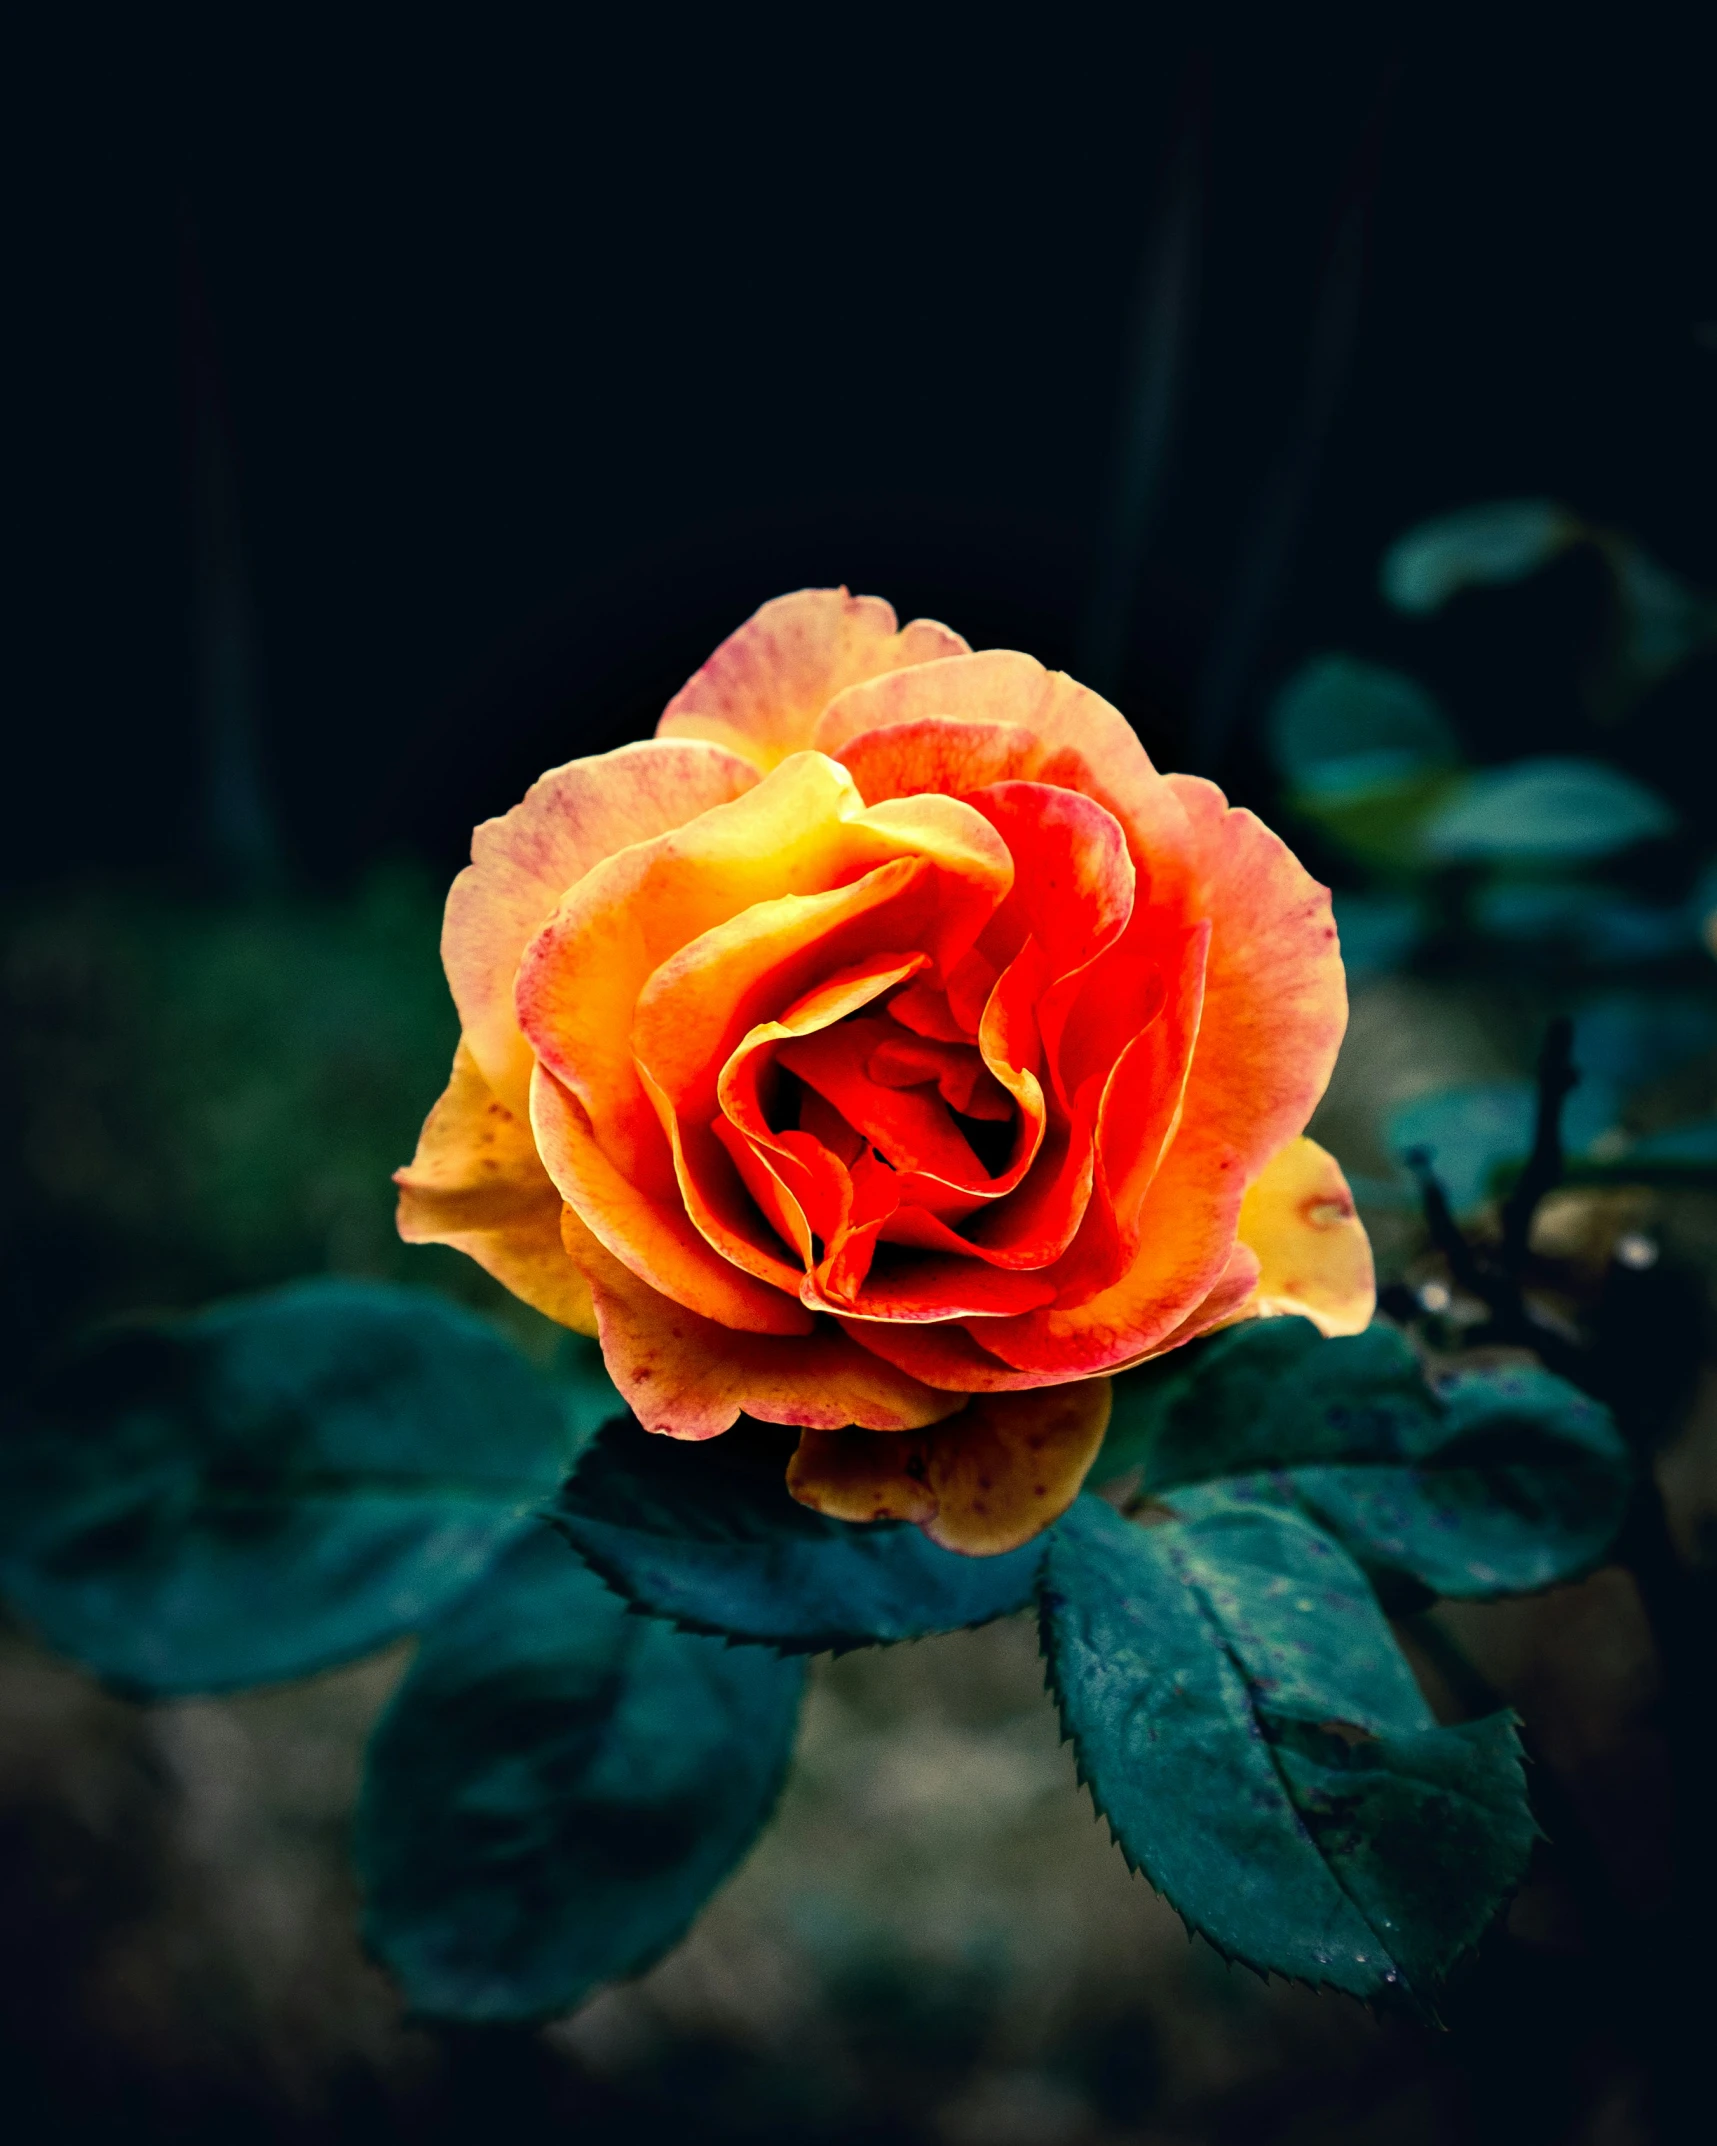 a bright orange rose bud in the midst of foliage